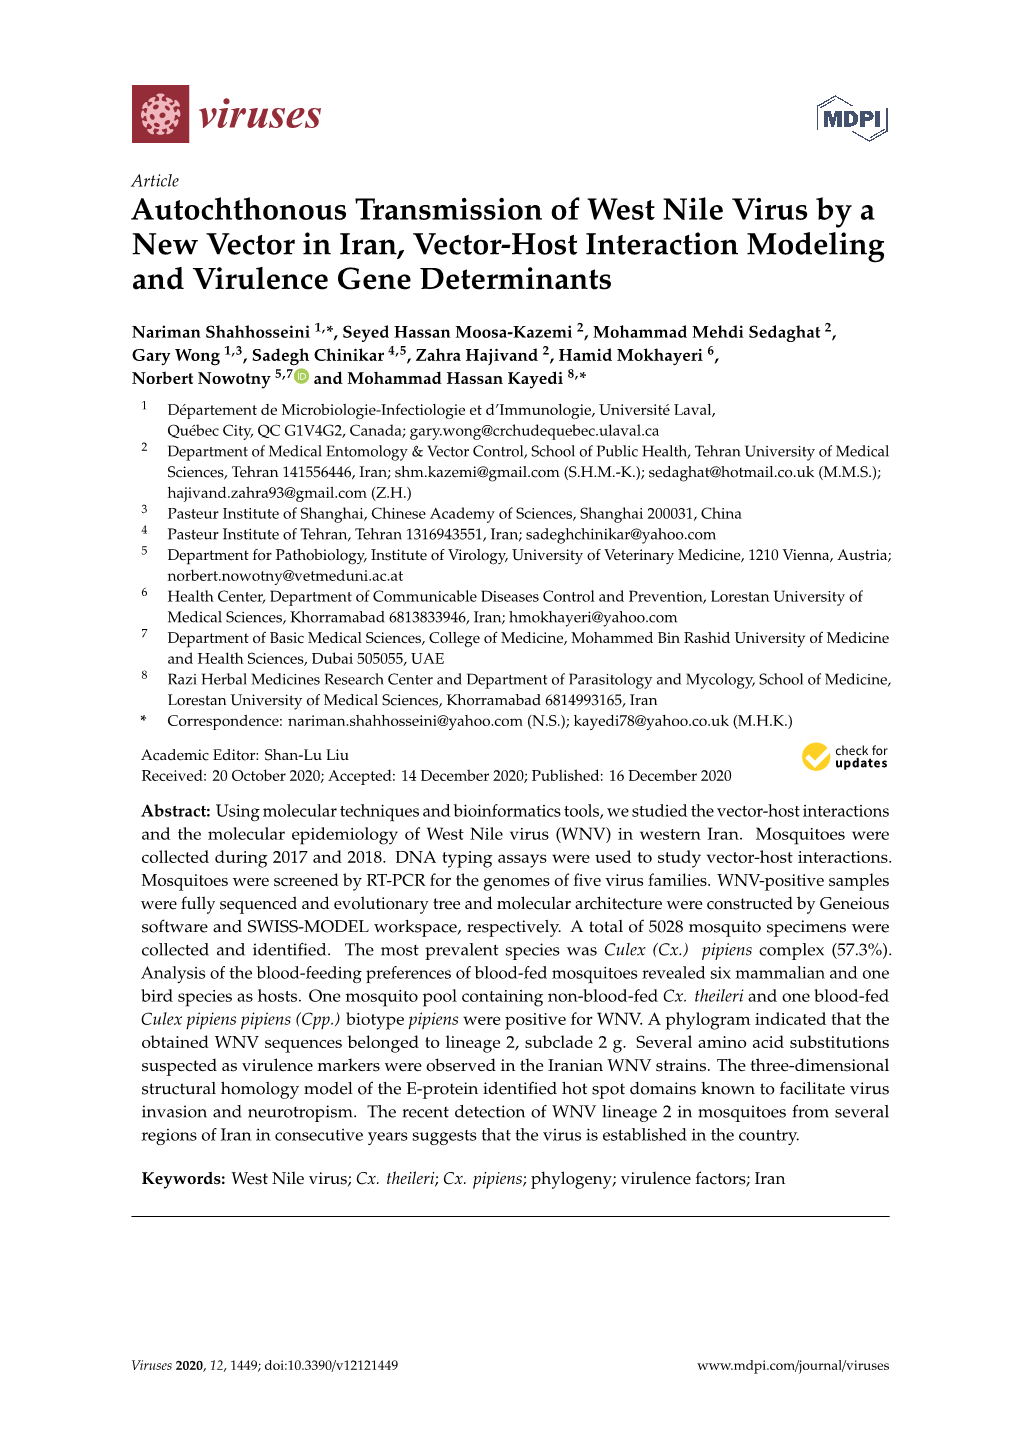 Autochthonous Transmission of West Nile Virus by a New Vector in Iran, Vector-Host Interaction Modeling and Virulence Gene Determinants